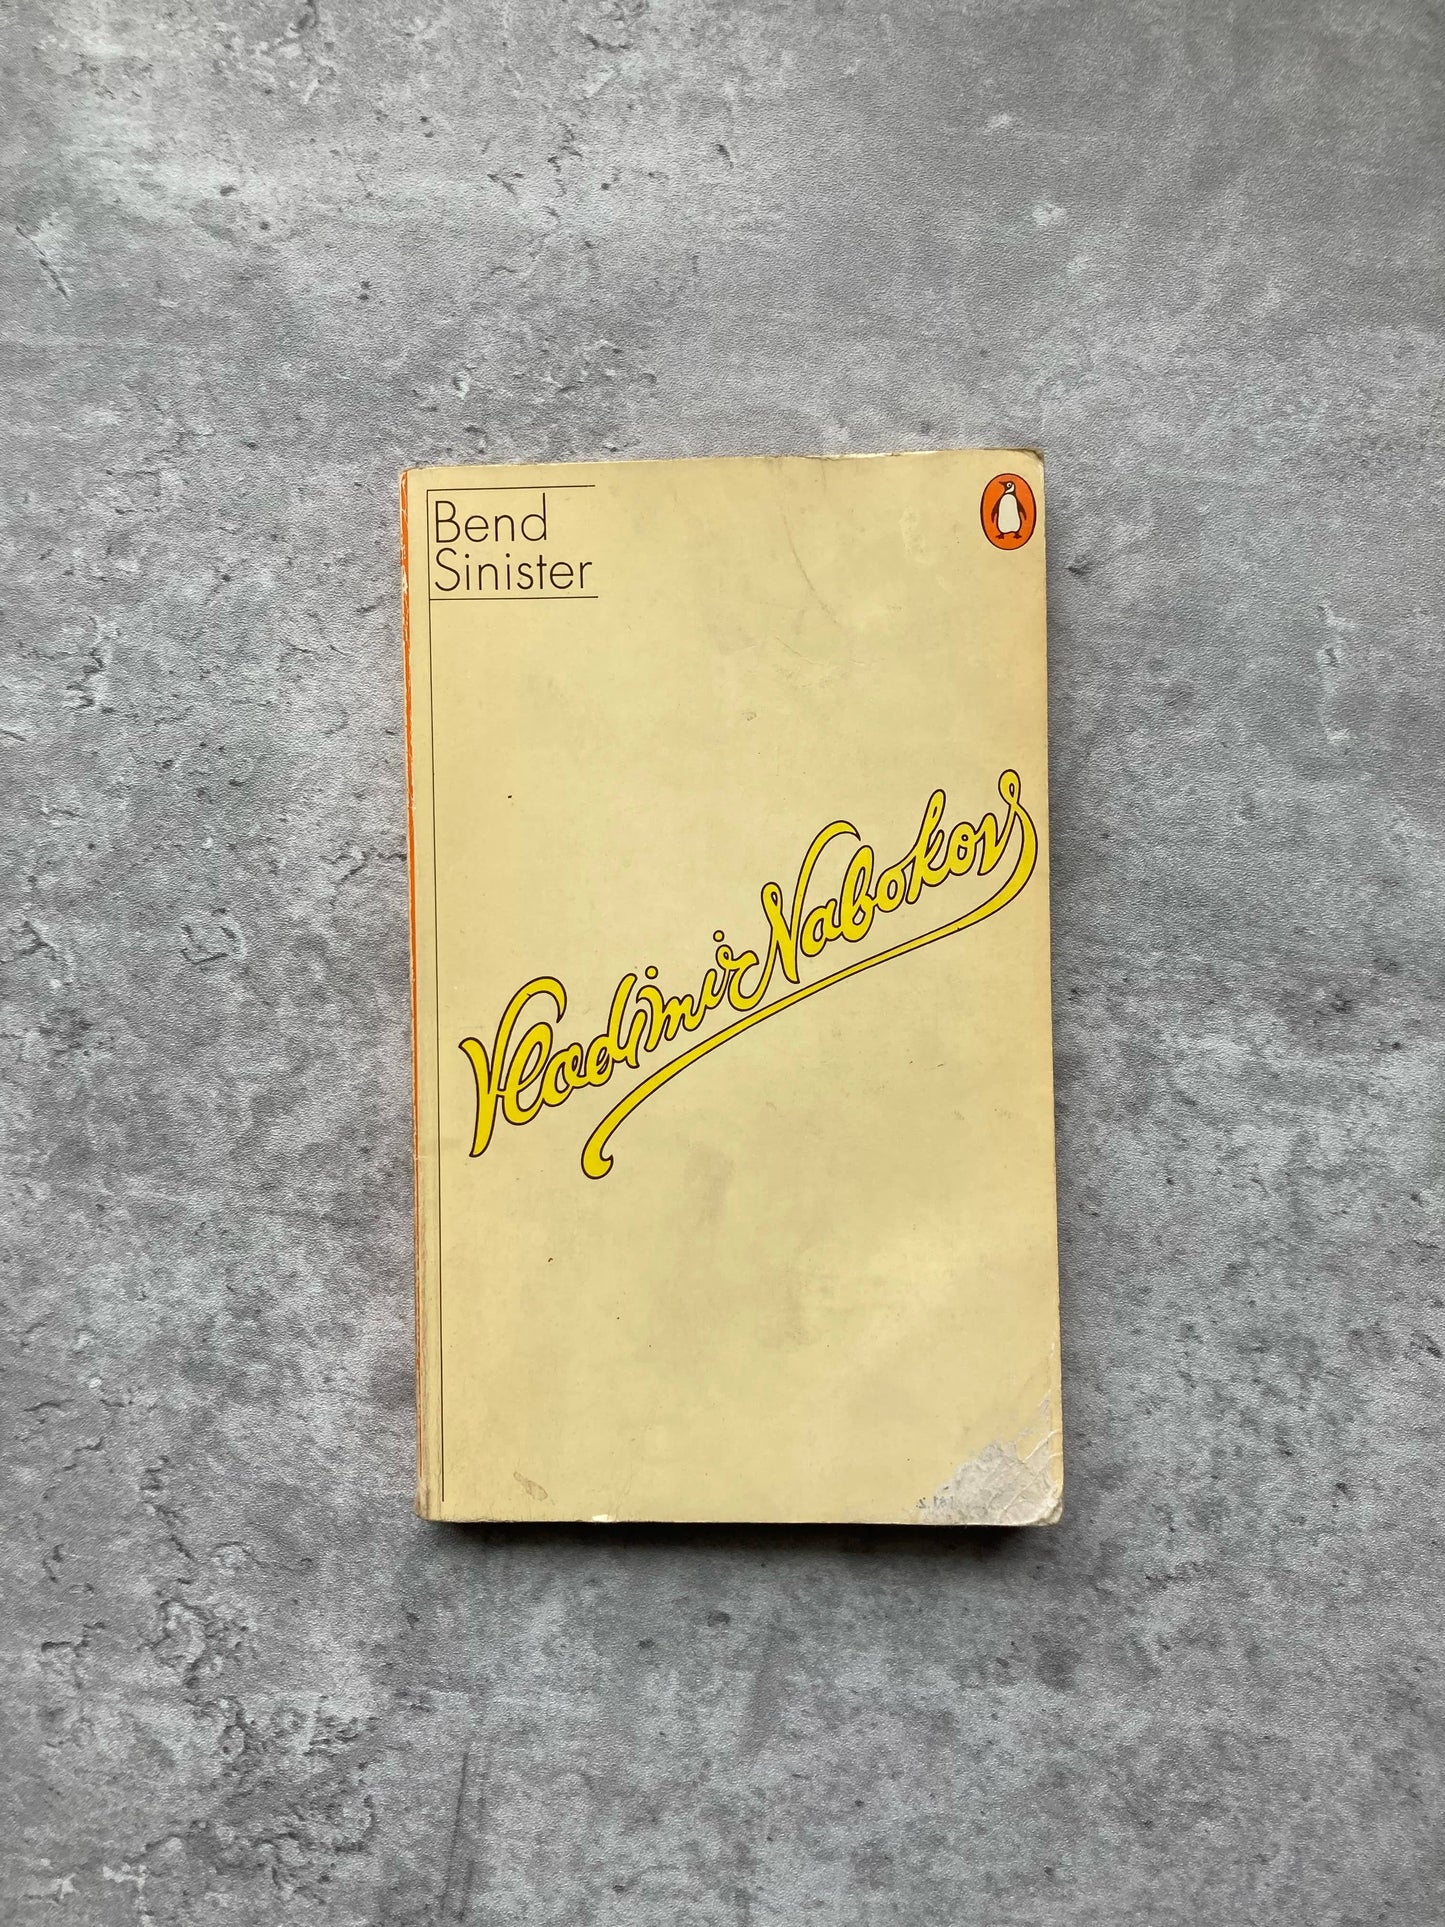 Bend Sinister by Vladimir Nabokov. Shop for new and used books with The Stone Circle, the only online bookstore near you in Los Angeles, California.